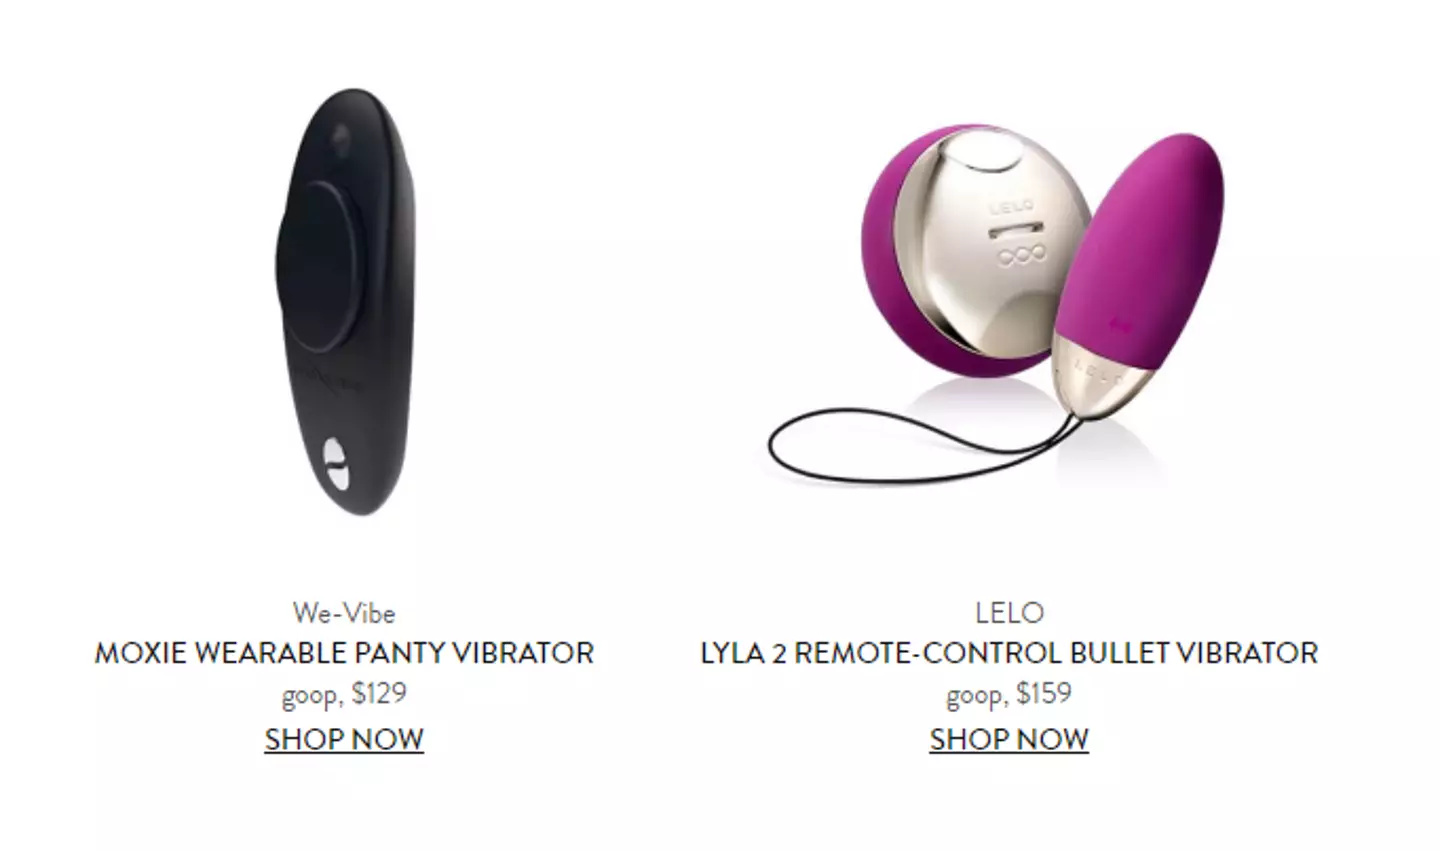 Goop has released some discreet sex toys. [